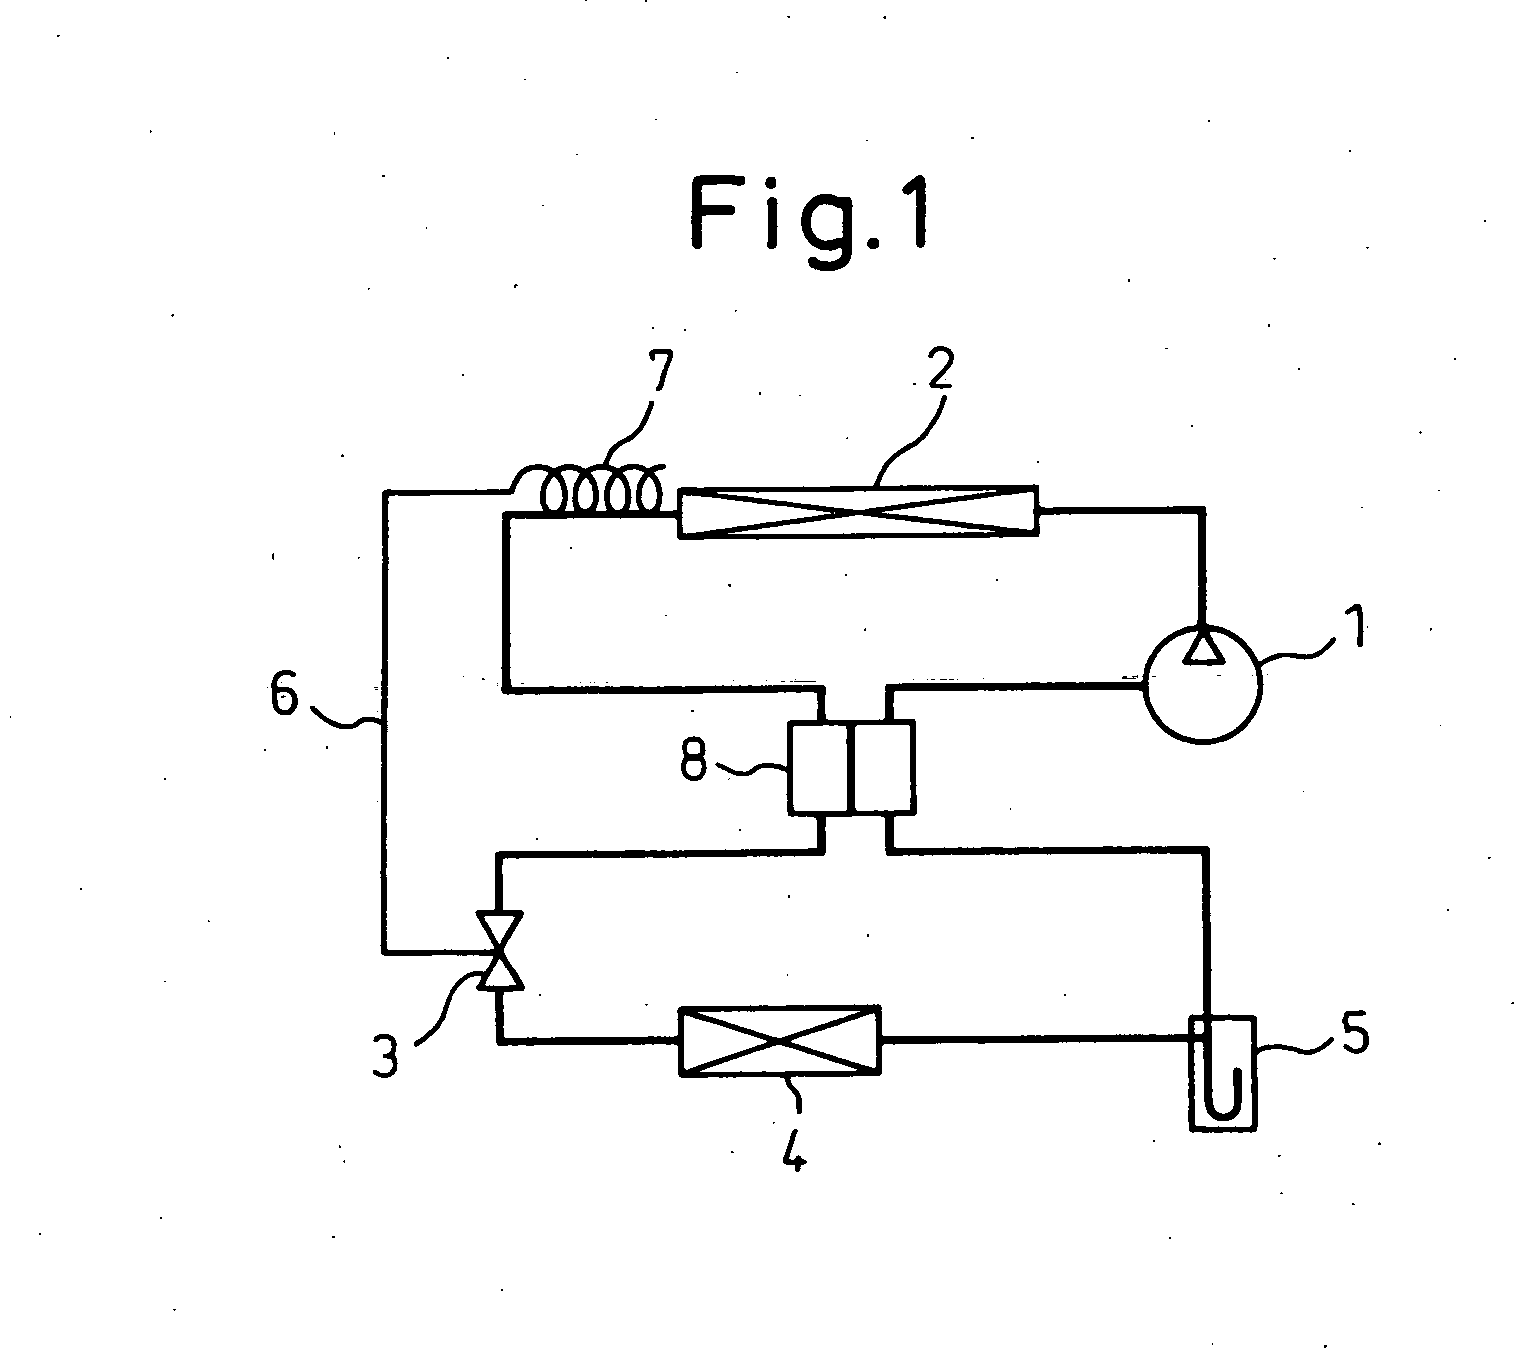 Pressure control valve for refrigeration cycle